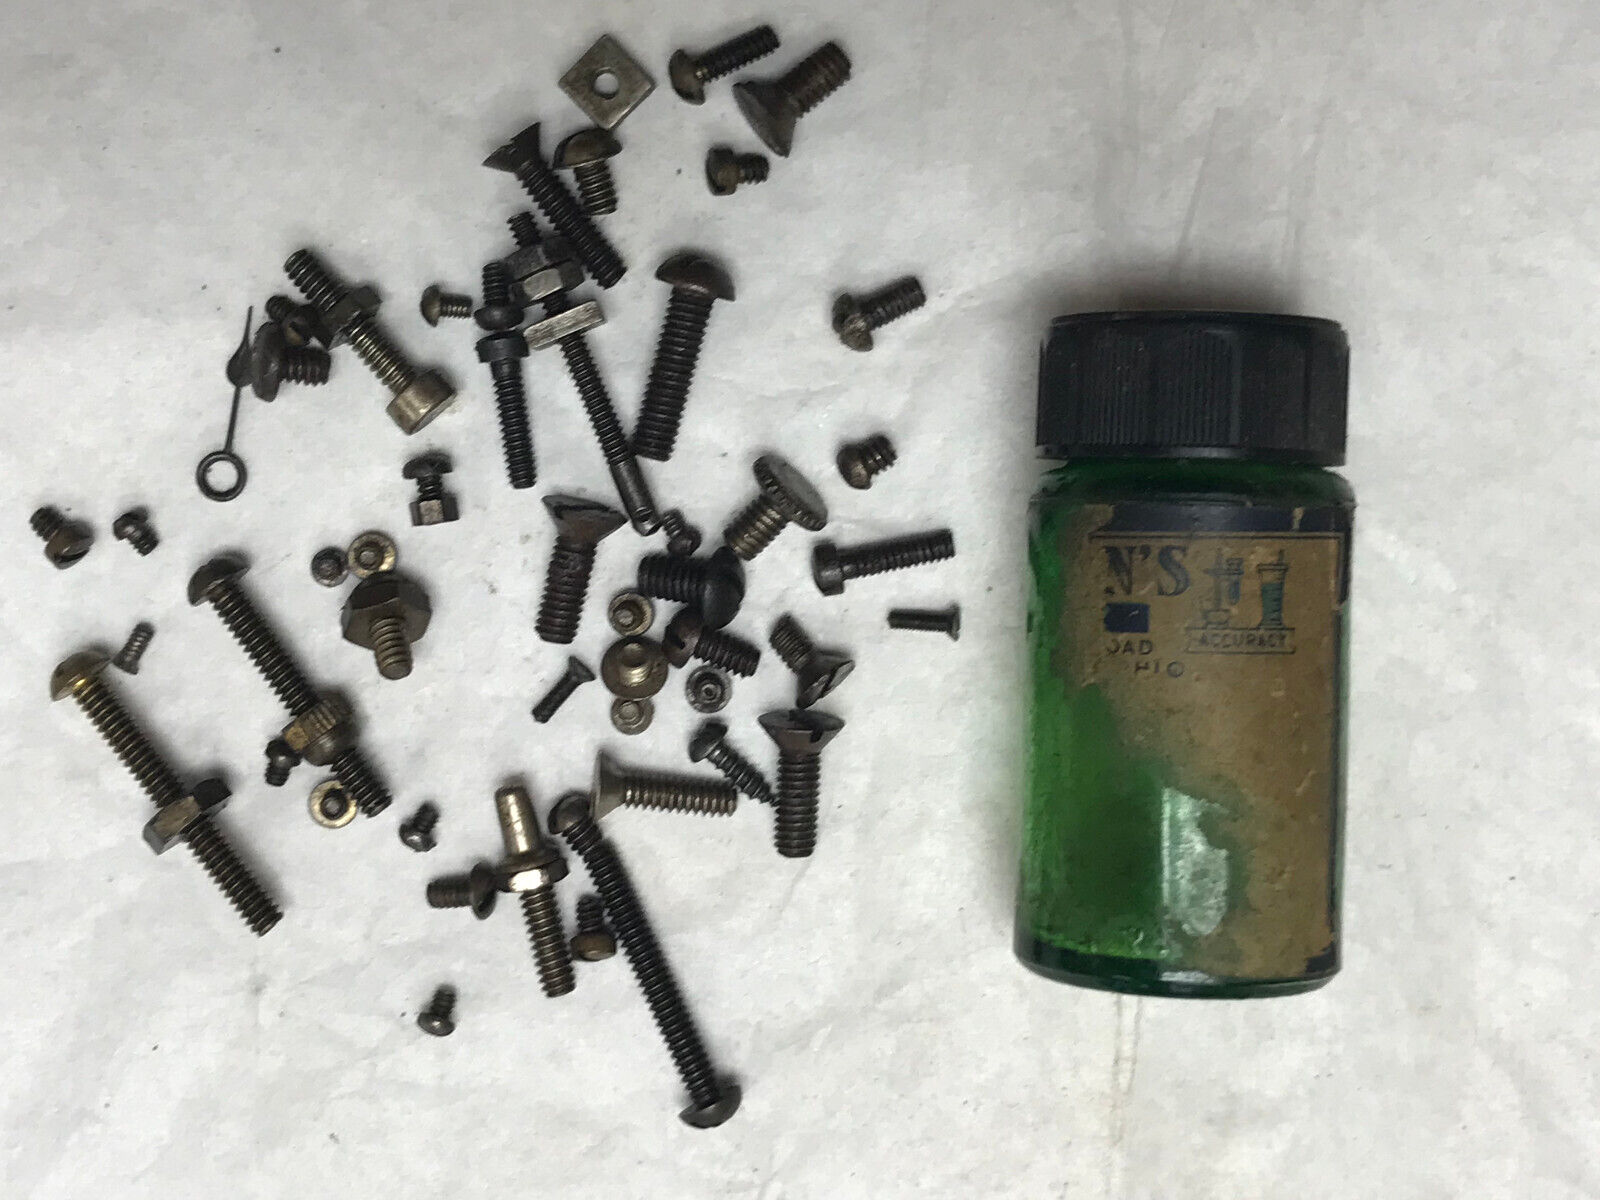 Vintage/Old Very Small Screws Stored in Old Glass Container - Lot of 49